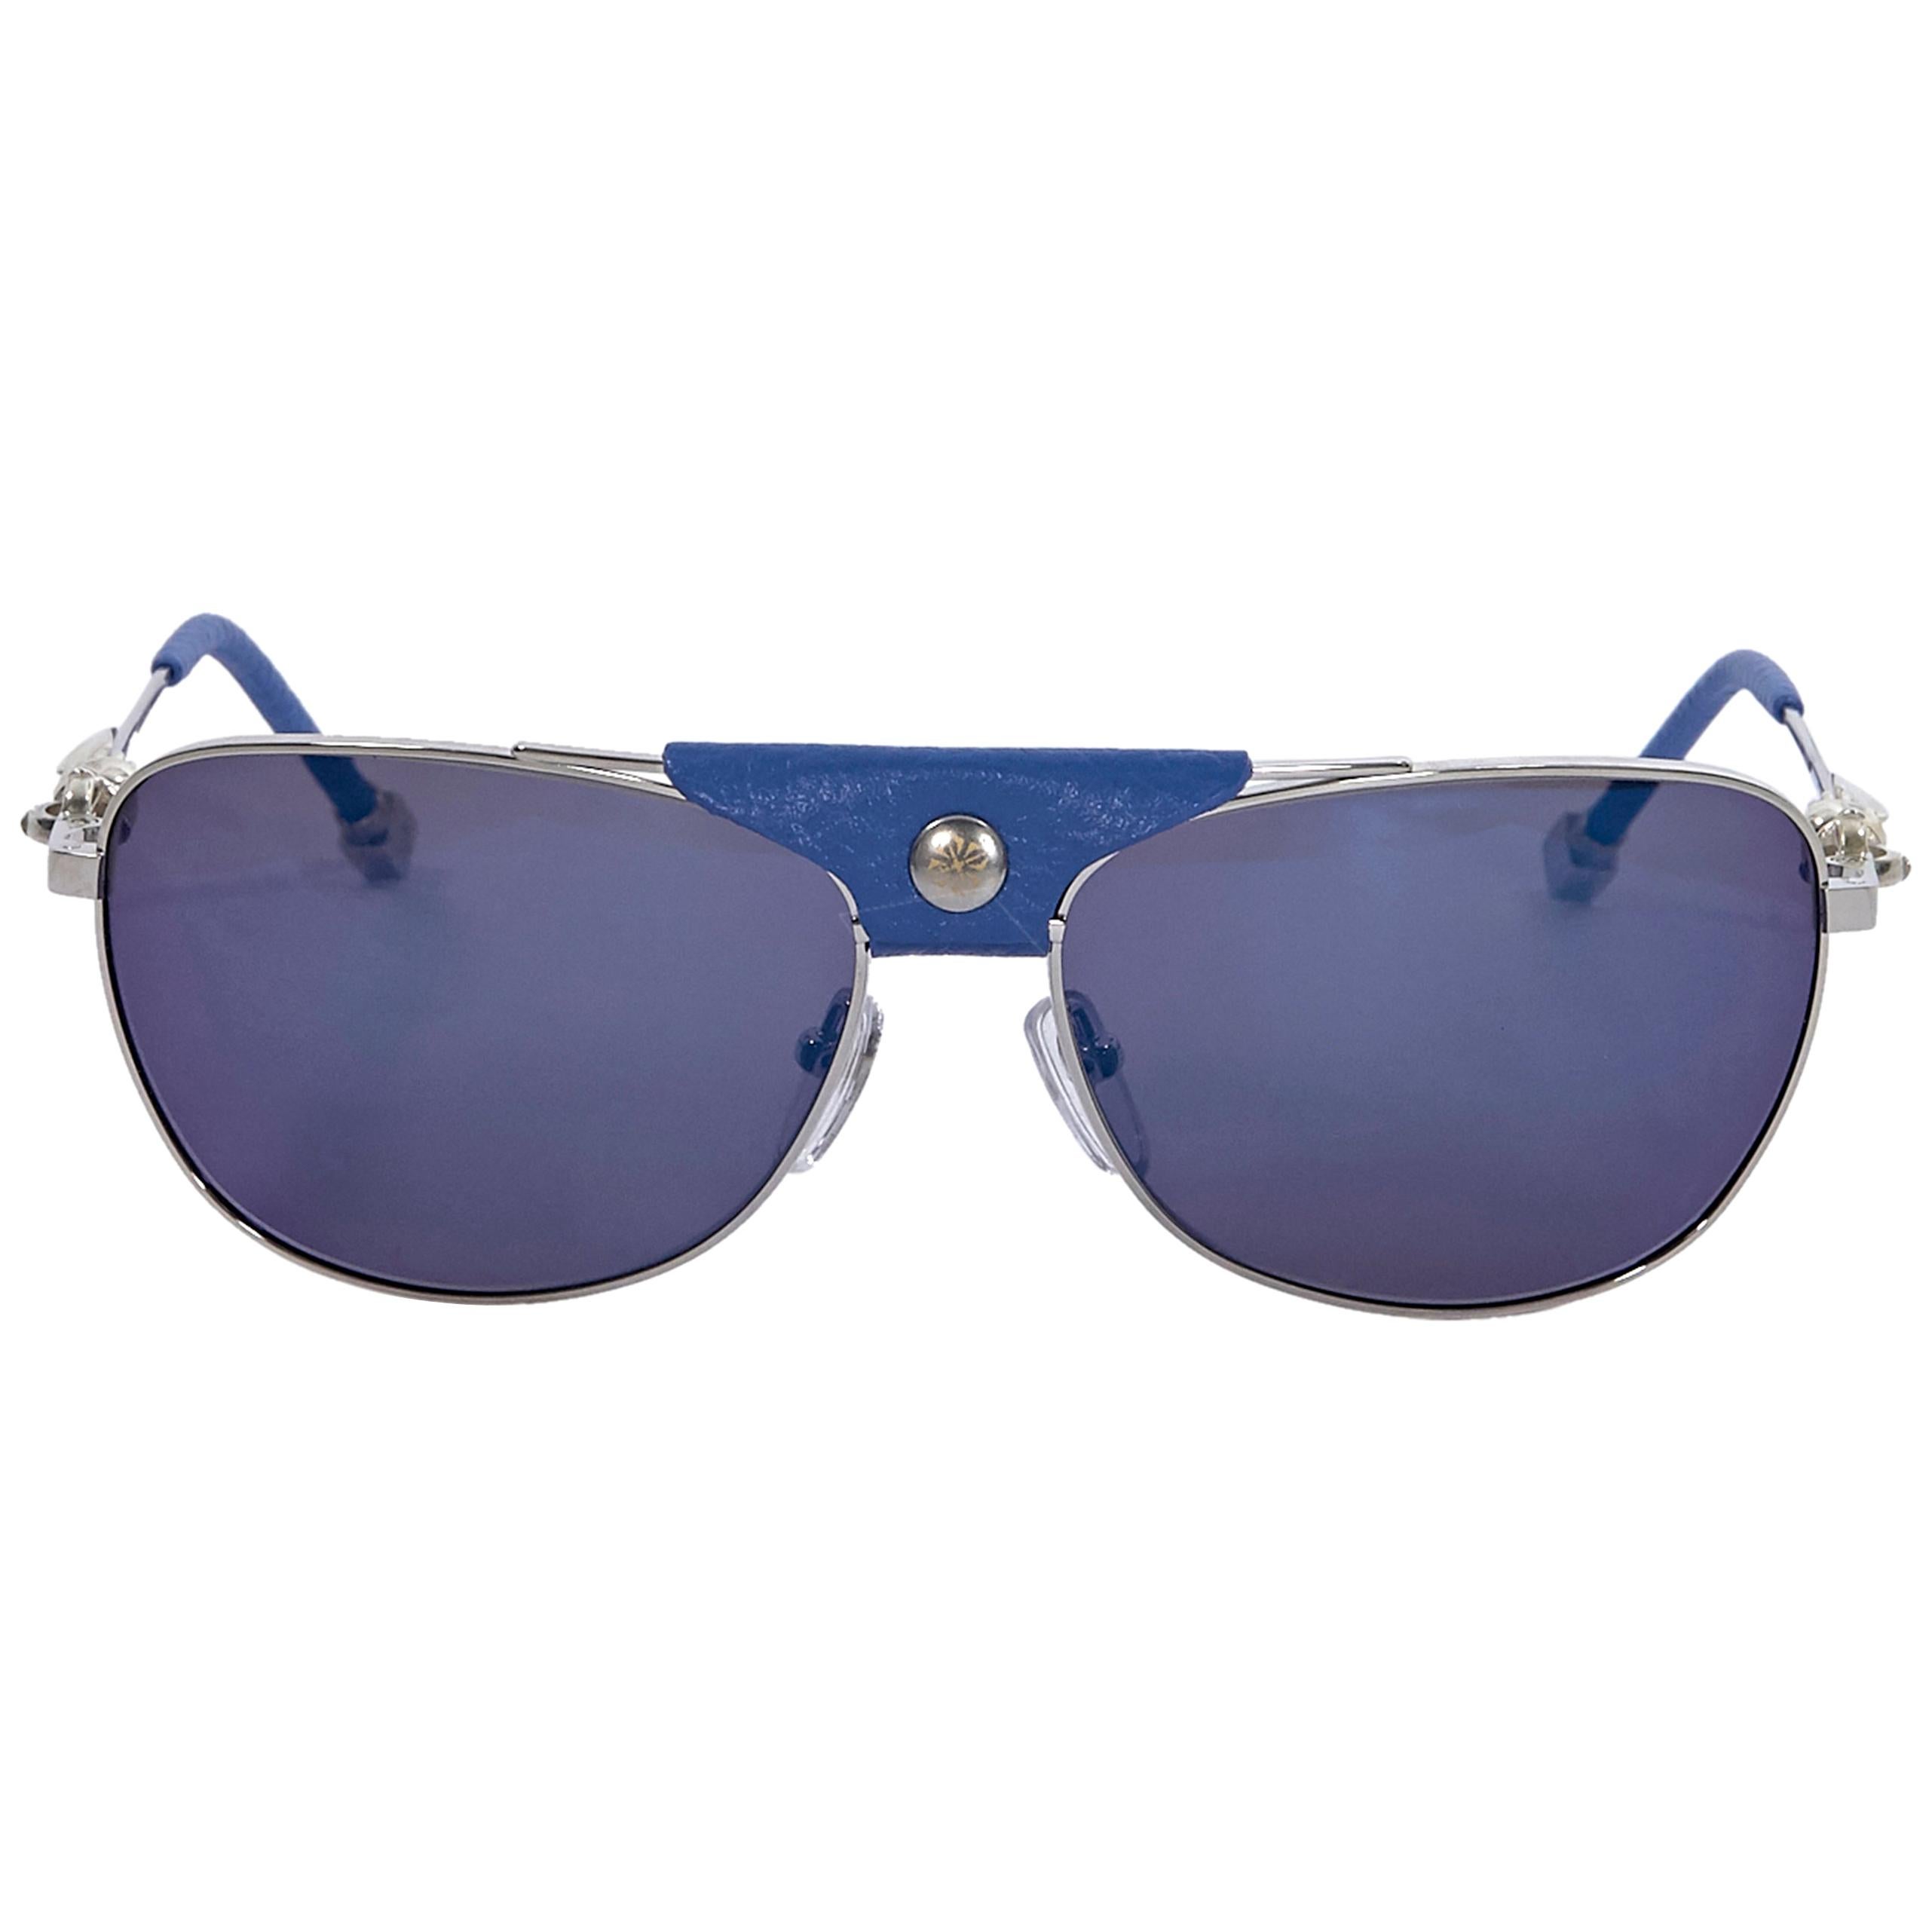 Shamballa Blue And Silver Leather-Trimmed Aviator Sunglasses